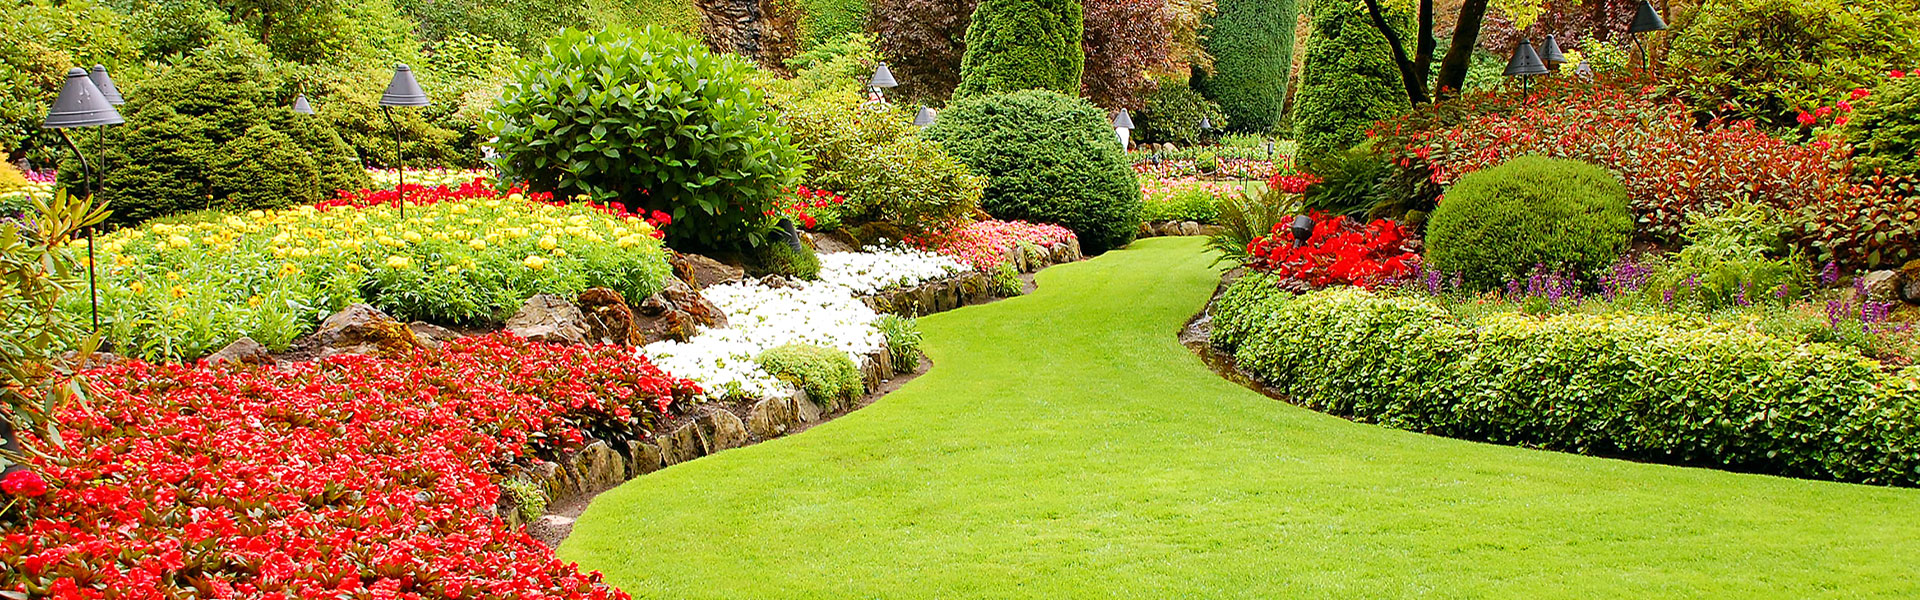 Optimum Irrigation Repair will help you with your residential irrigation needs.